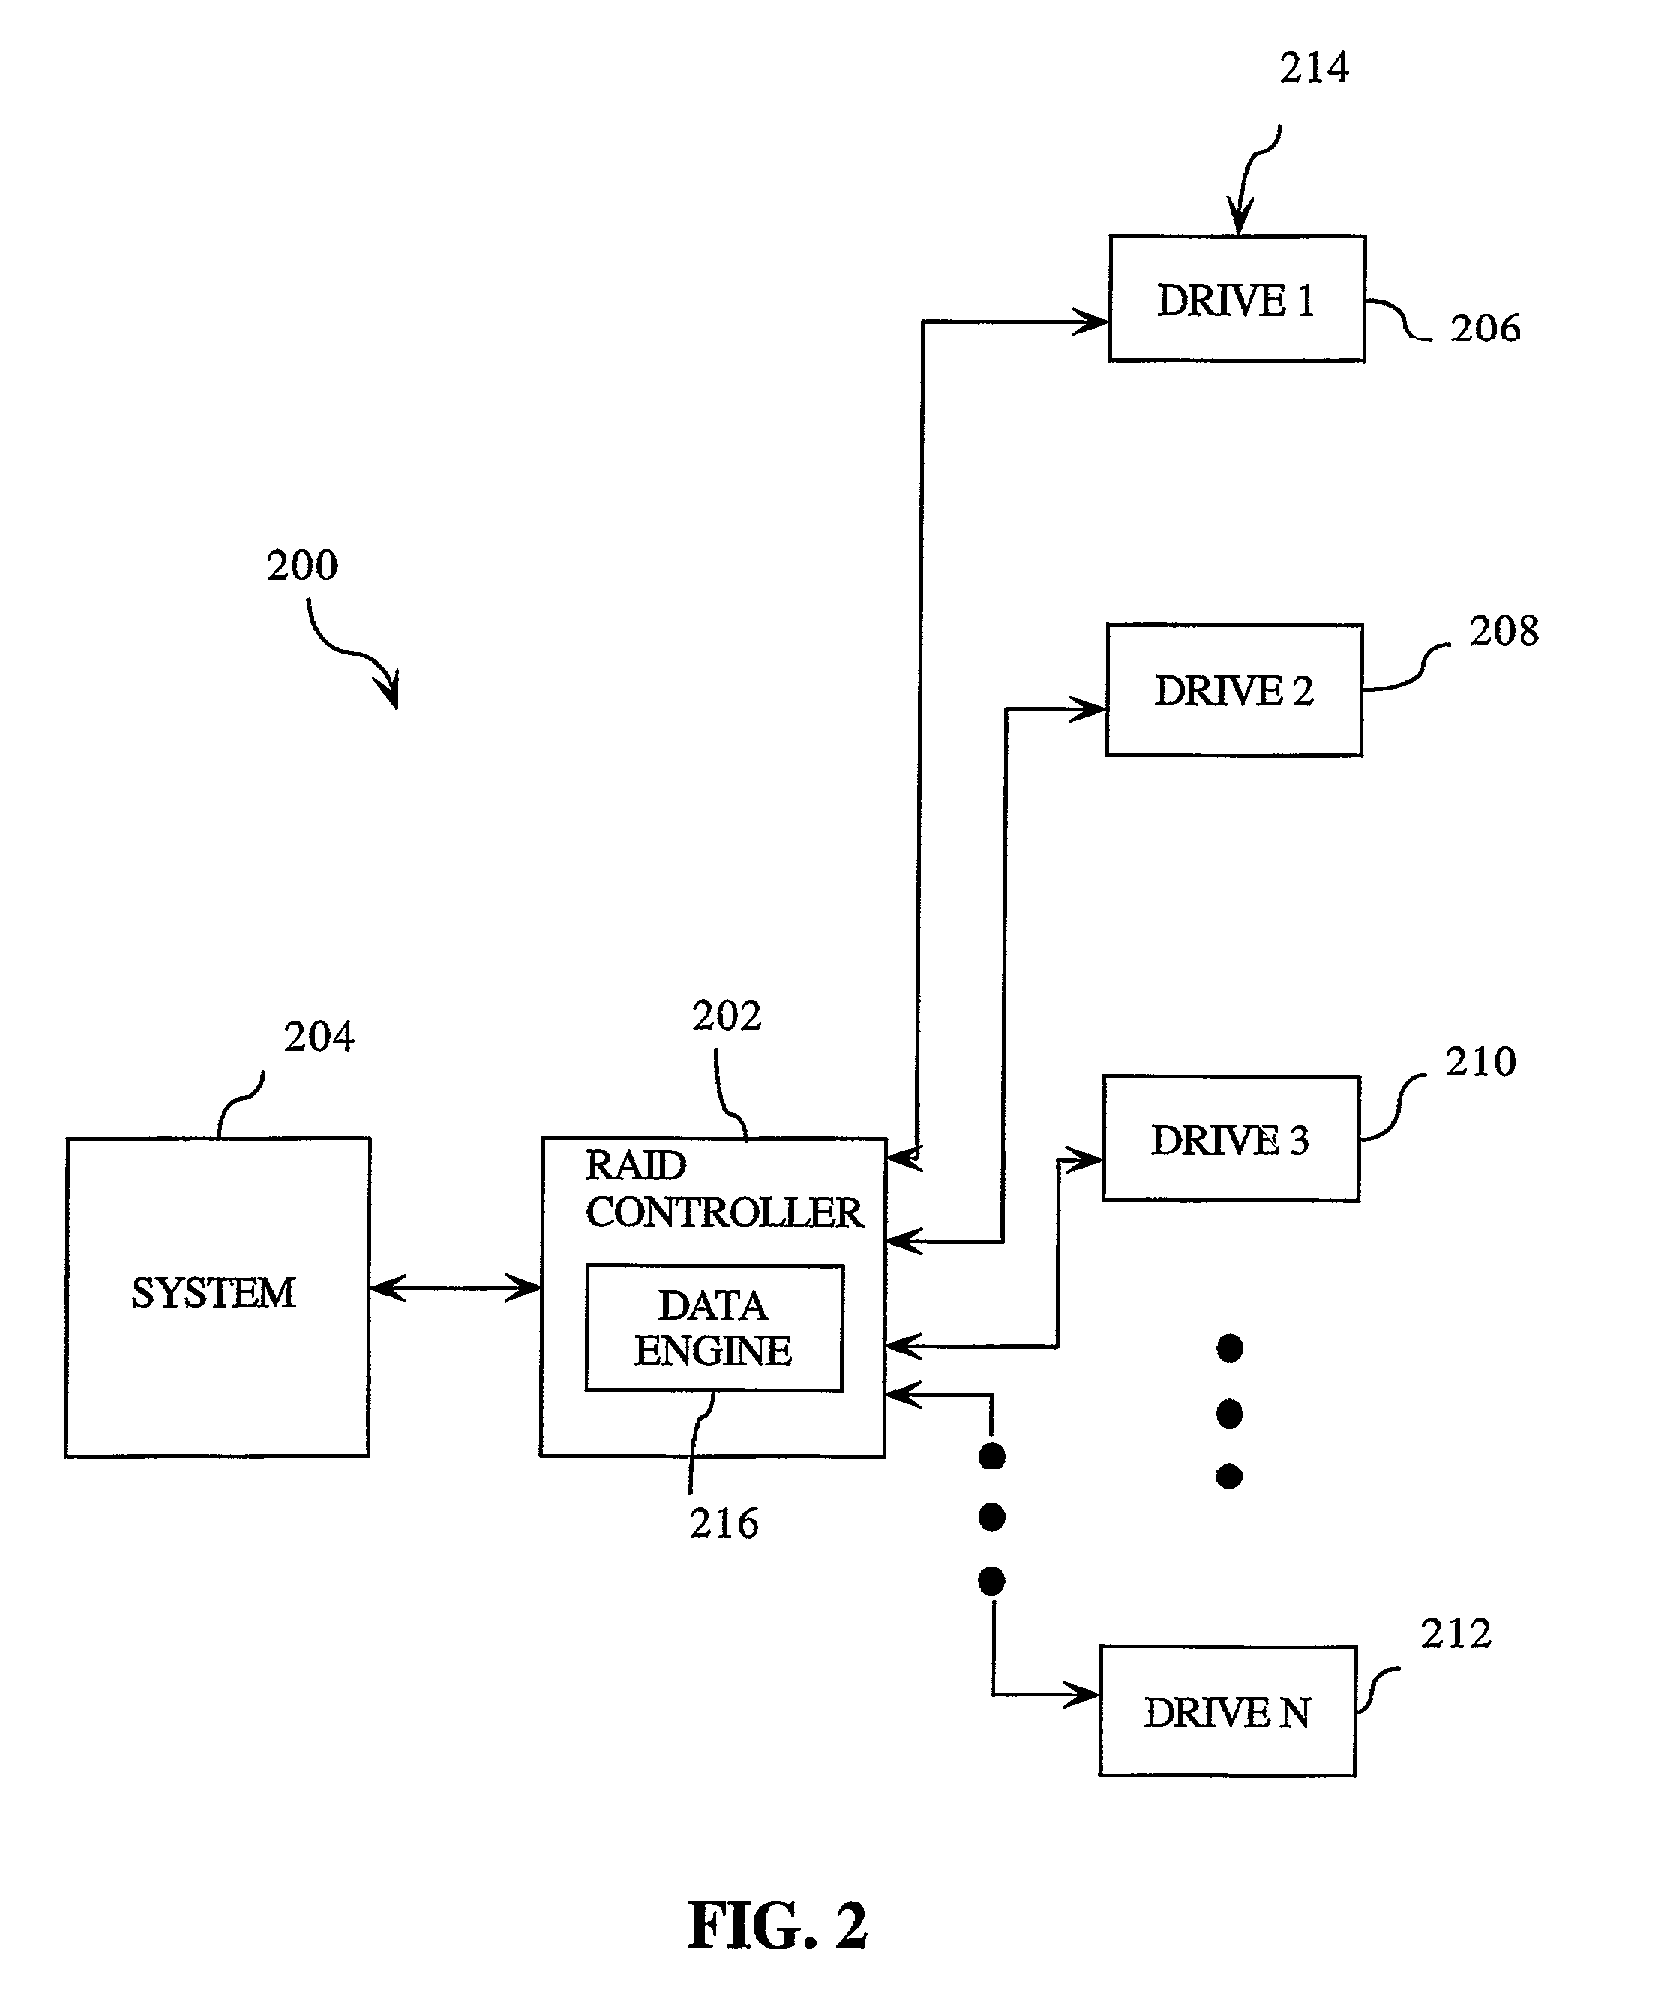 Method for raid striped I/O request generation using a shared scatter gather list